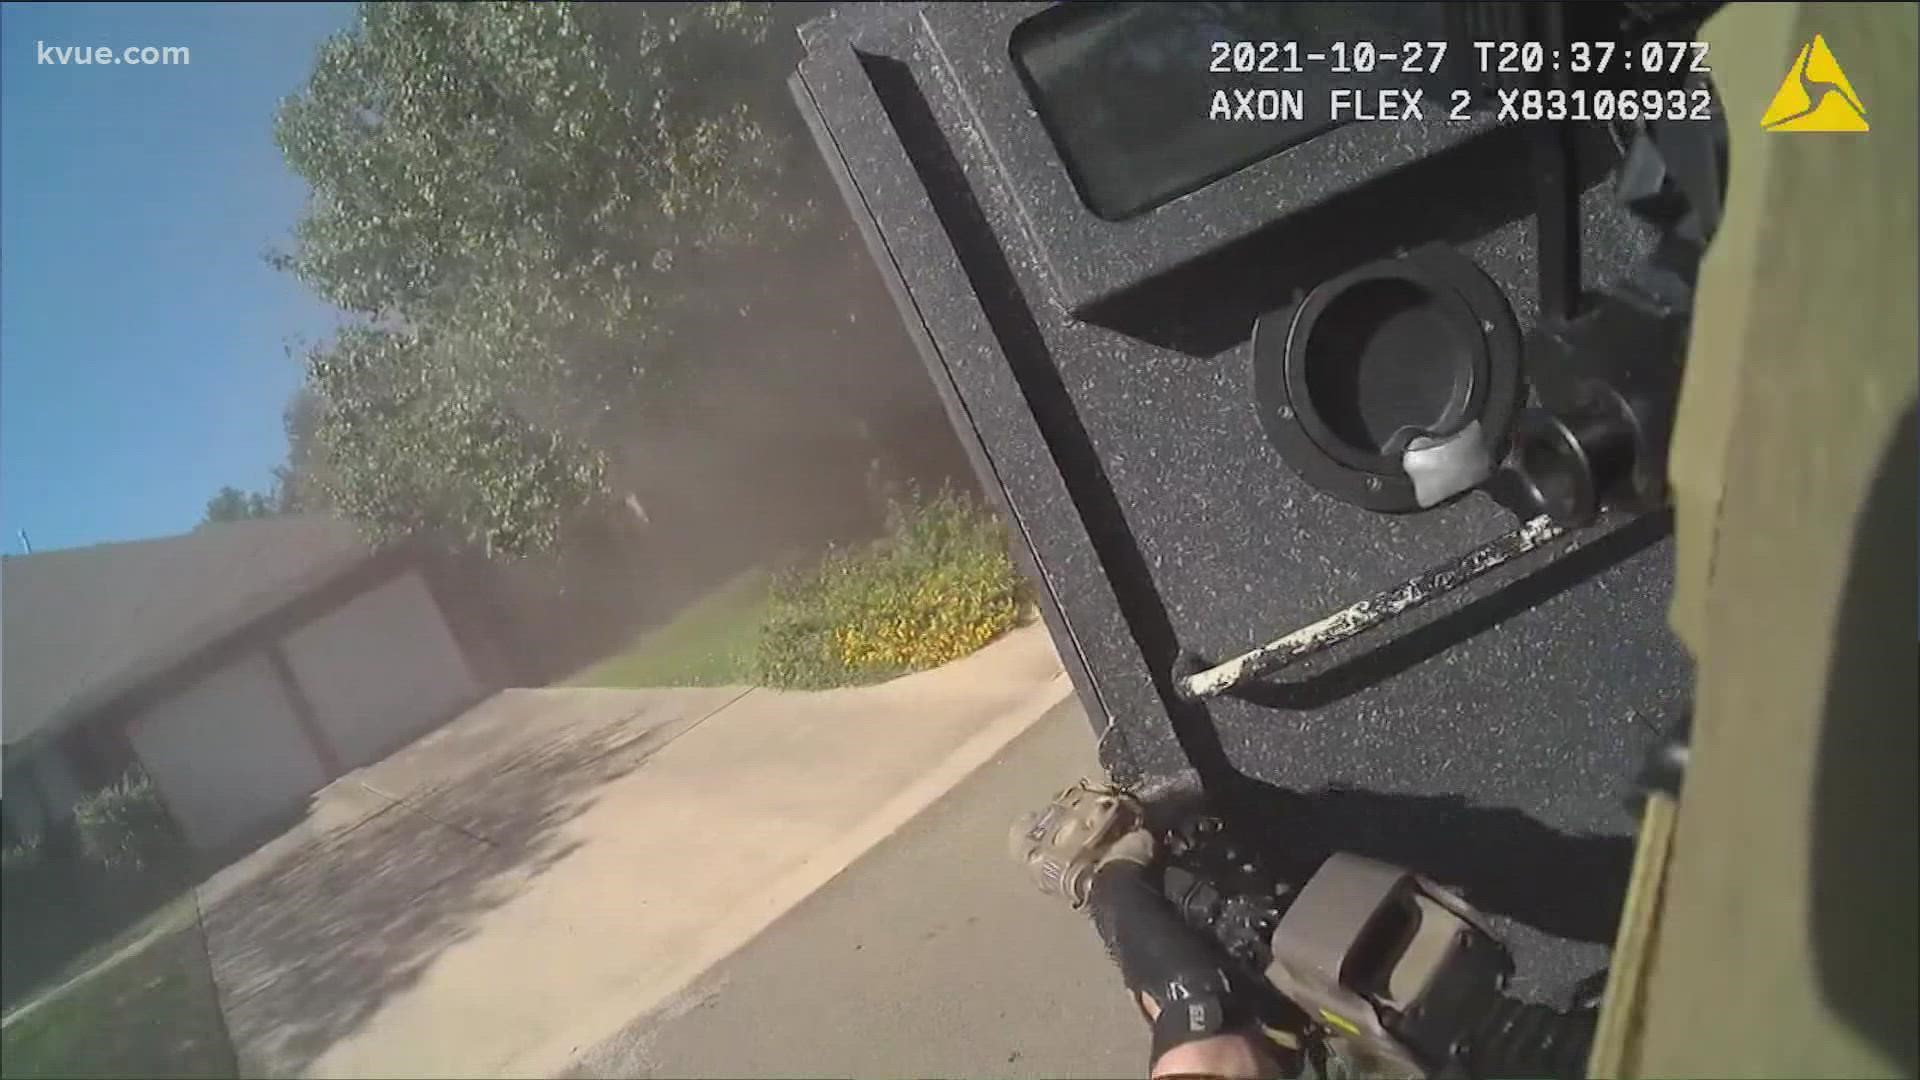 New bodycam video has been released of a SWAT call that ended with a house fire and one man dead.